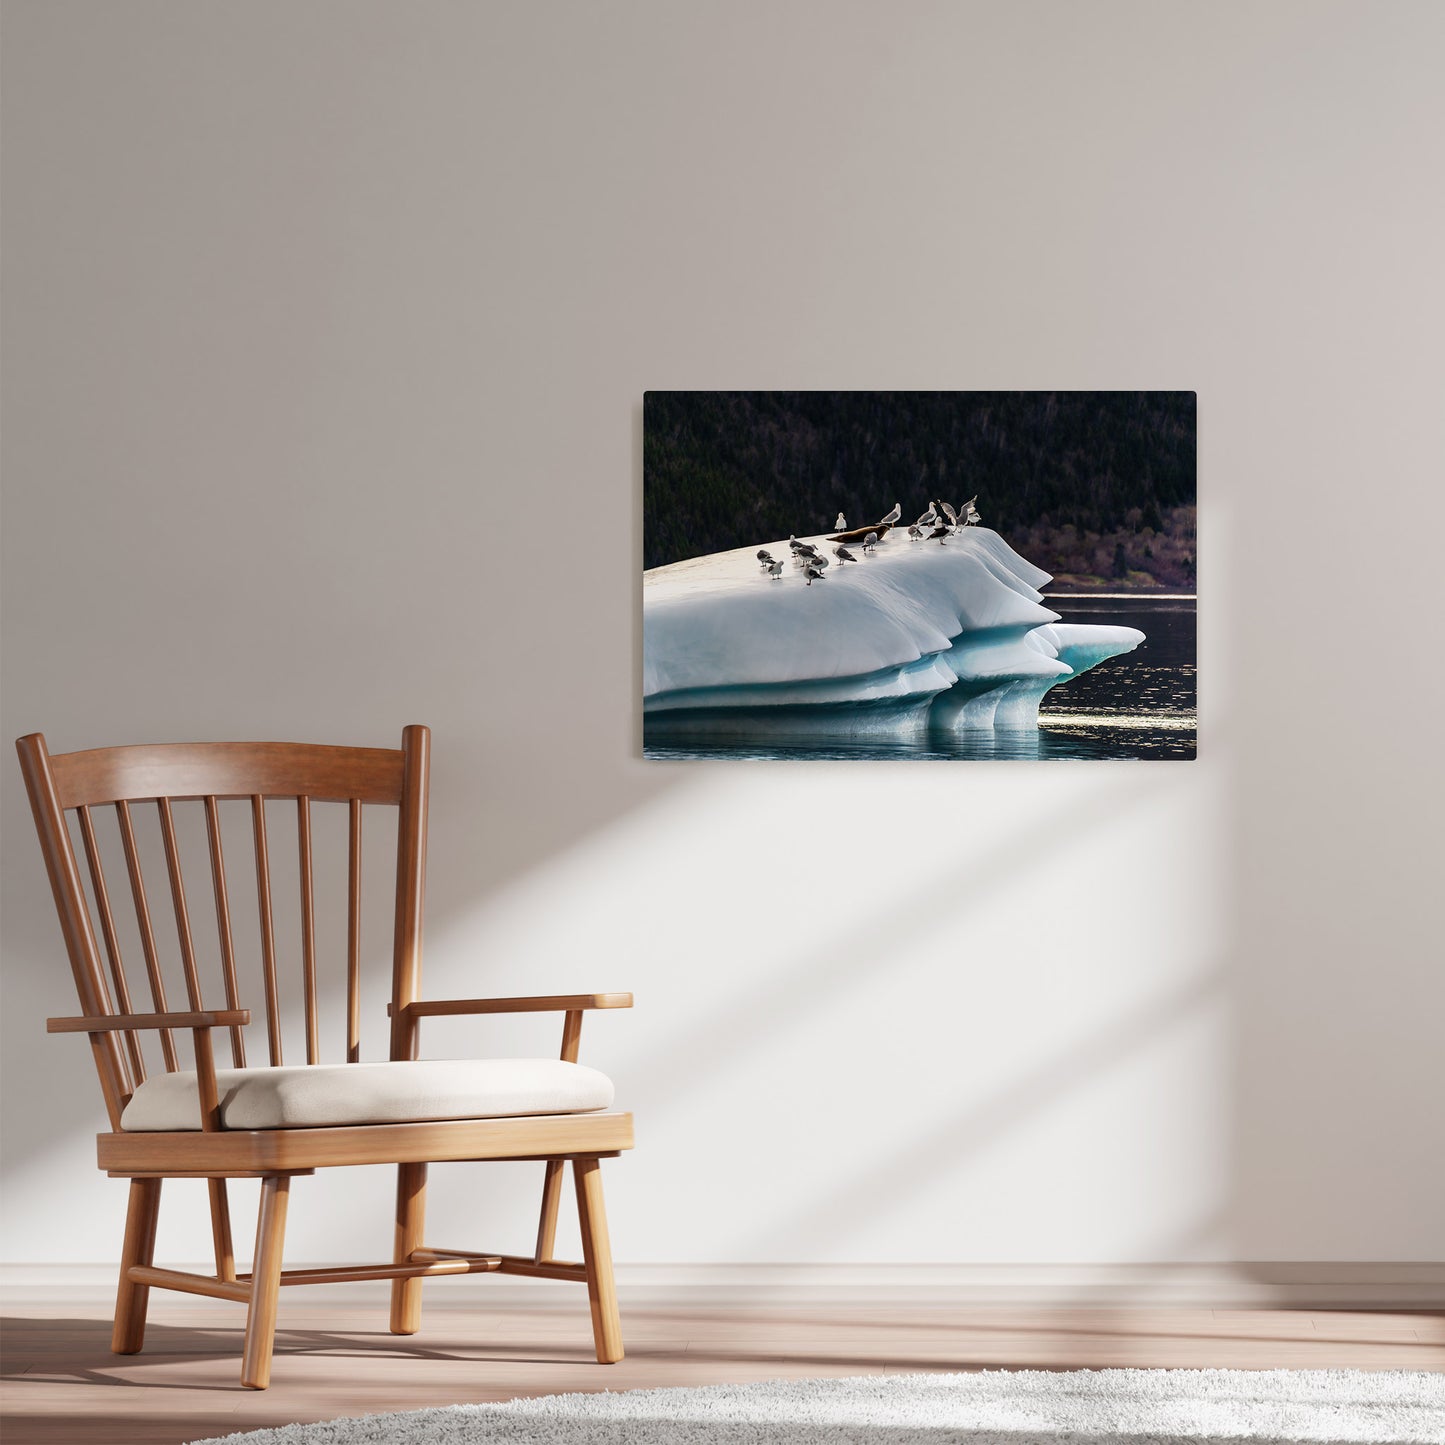 Ray Mackey's Hampden Seal photography reproduced on HD metal print and displayed on wall